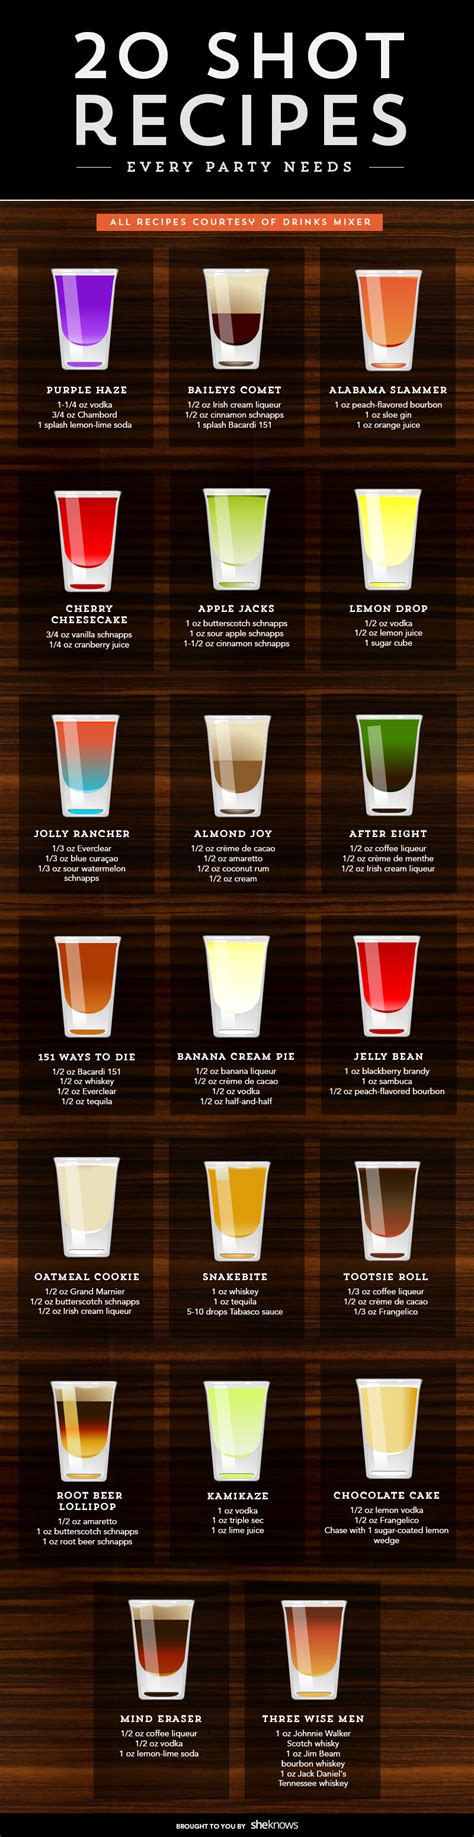 20 Easy Shot Recipes To Take Your Party To The Next Level Infographic